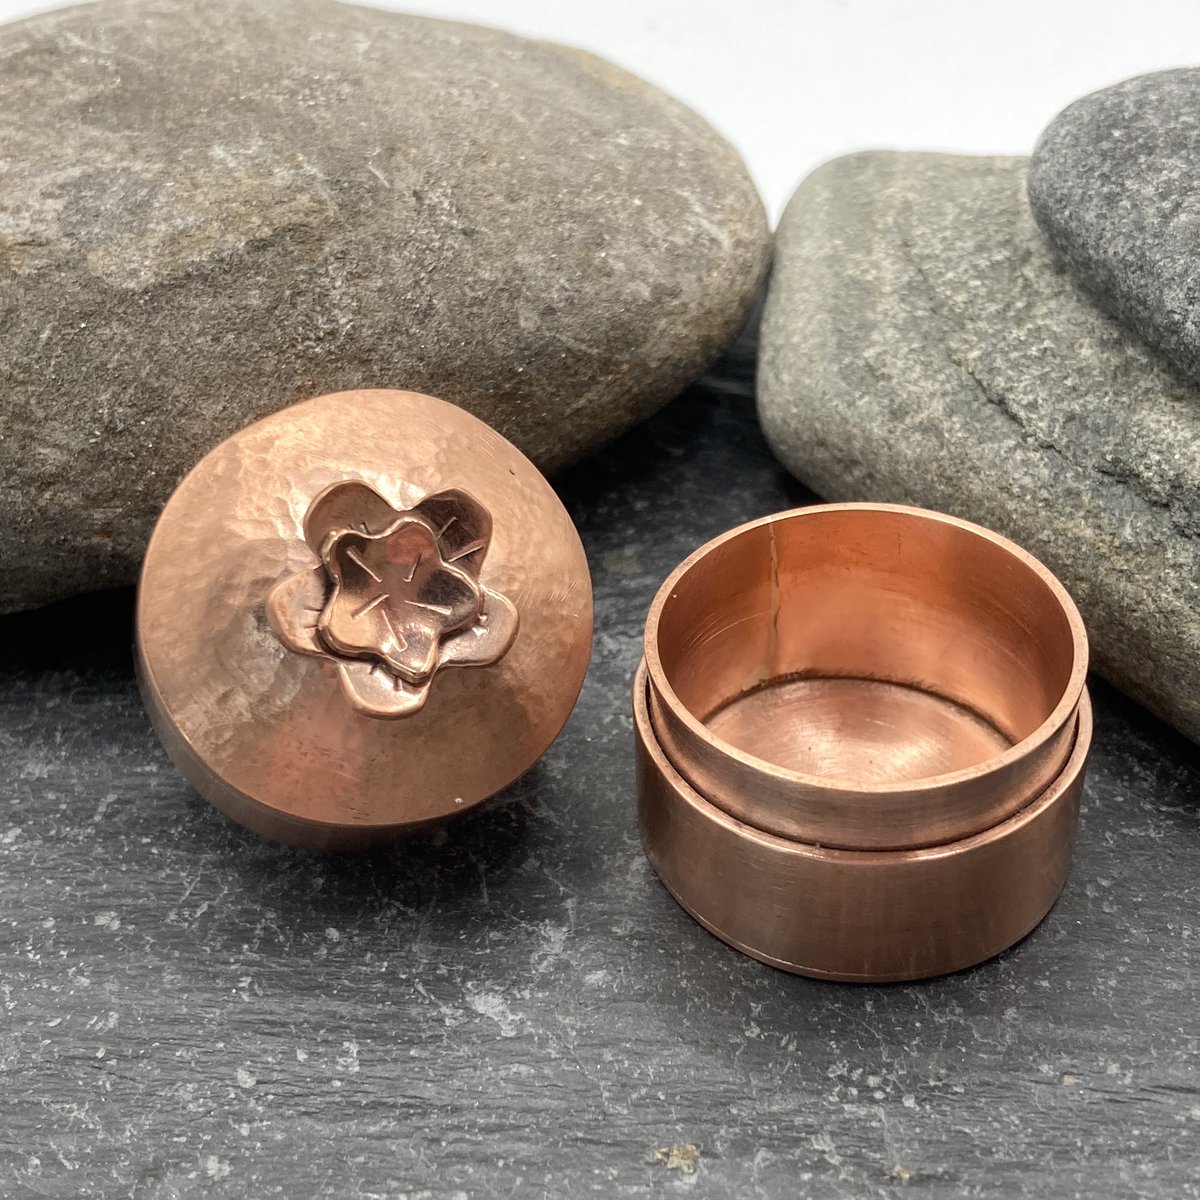 A pretty little copper pot, entirely handmade by me, using up some scraps of copper.
What would you keep in it?

 #SmartSocial
#UKWeekendHour
#UKGiftHour
#UKGiftAm
#CraftBizParty 
#HandmadeHour